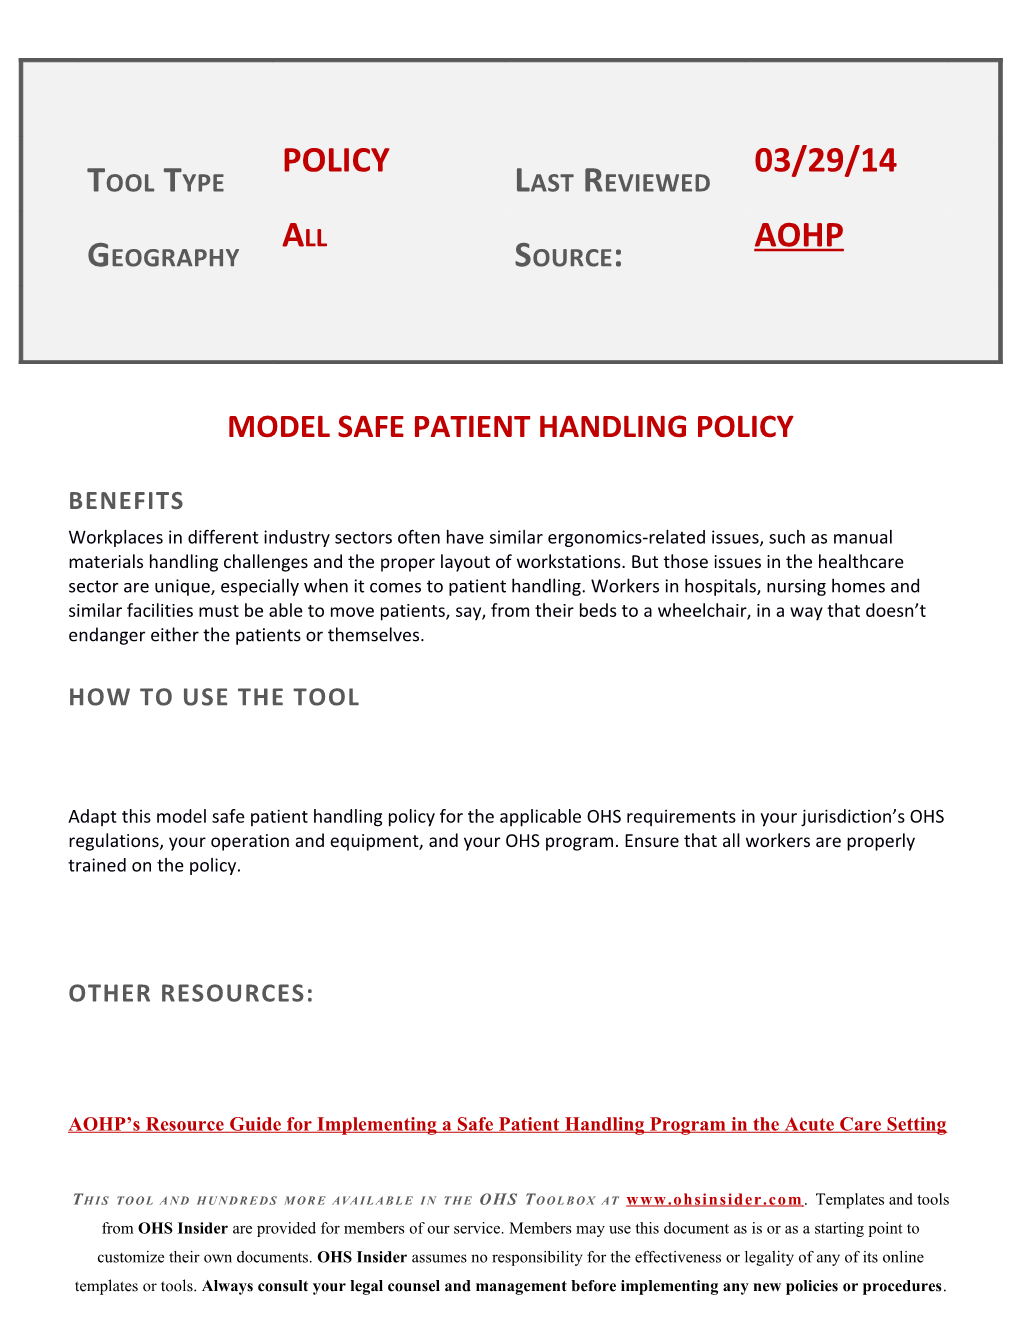 Model Safe Patient Handling Policy